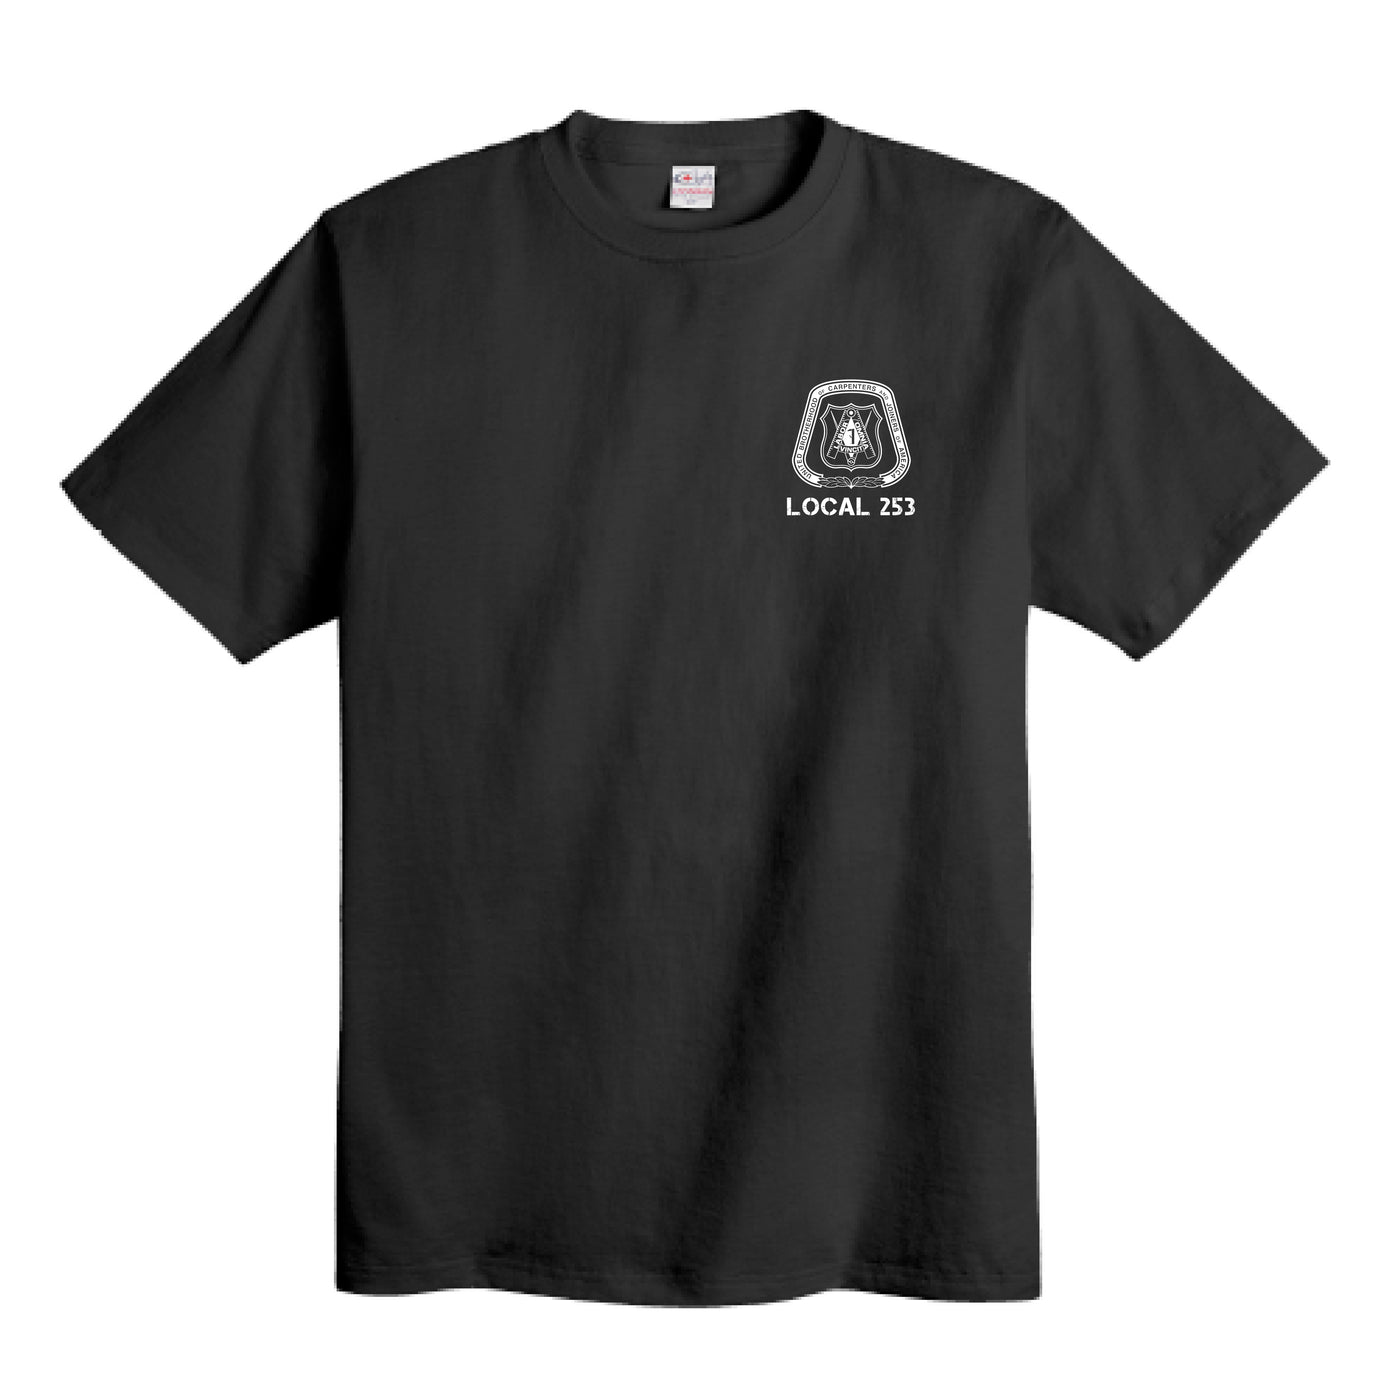 UBC 253 All In A Day's Work - Unisex T-Shirt (Black)